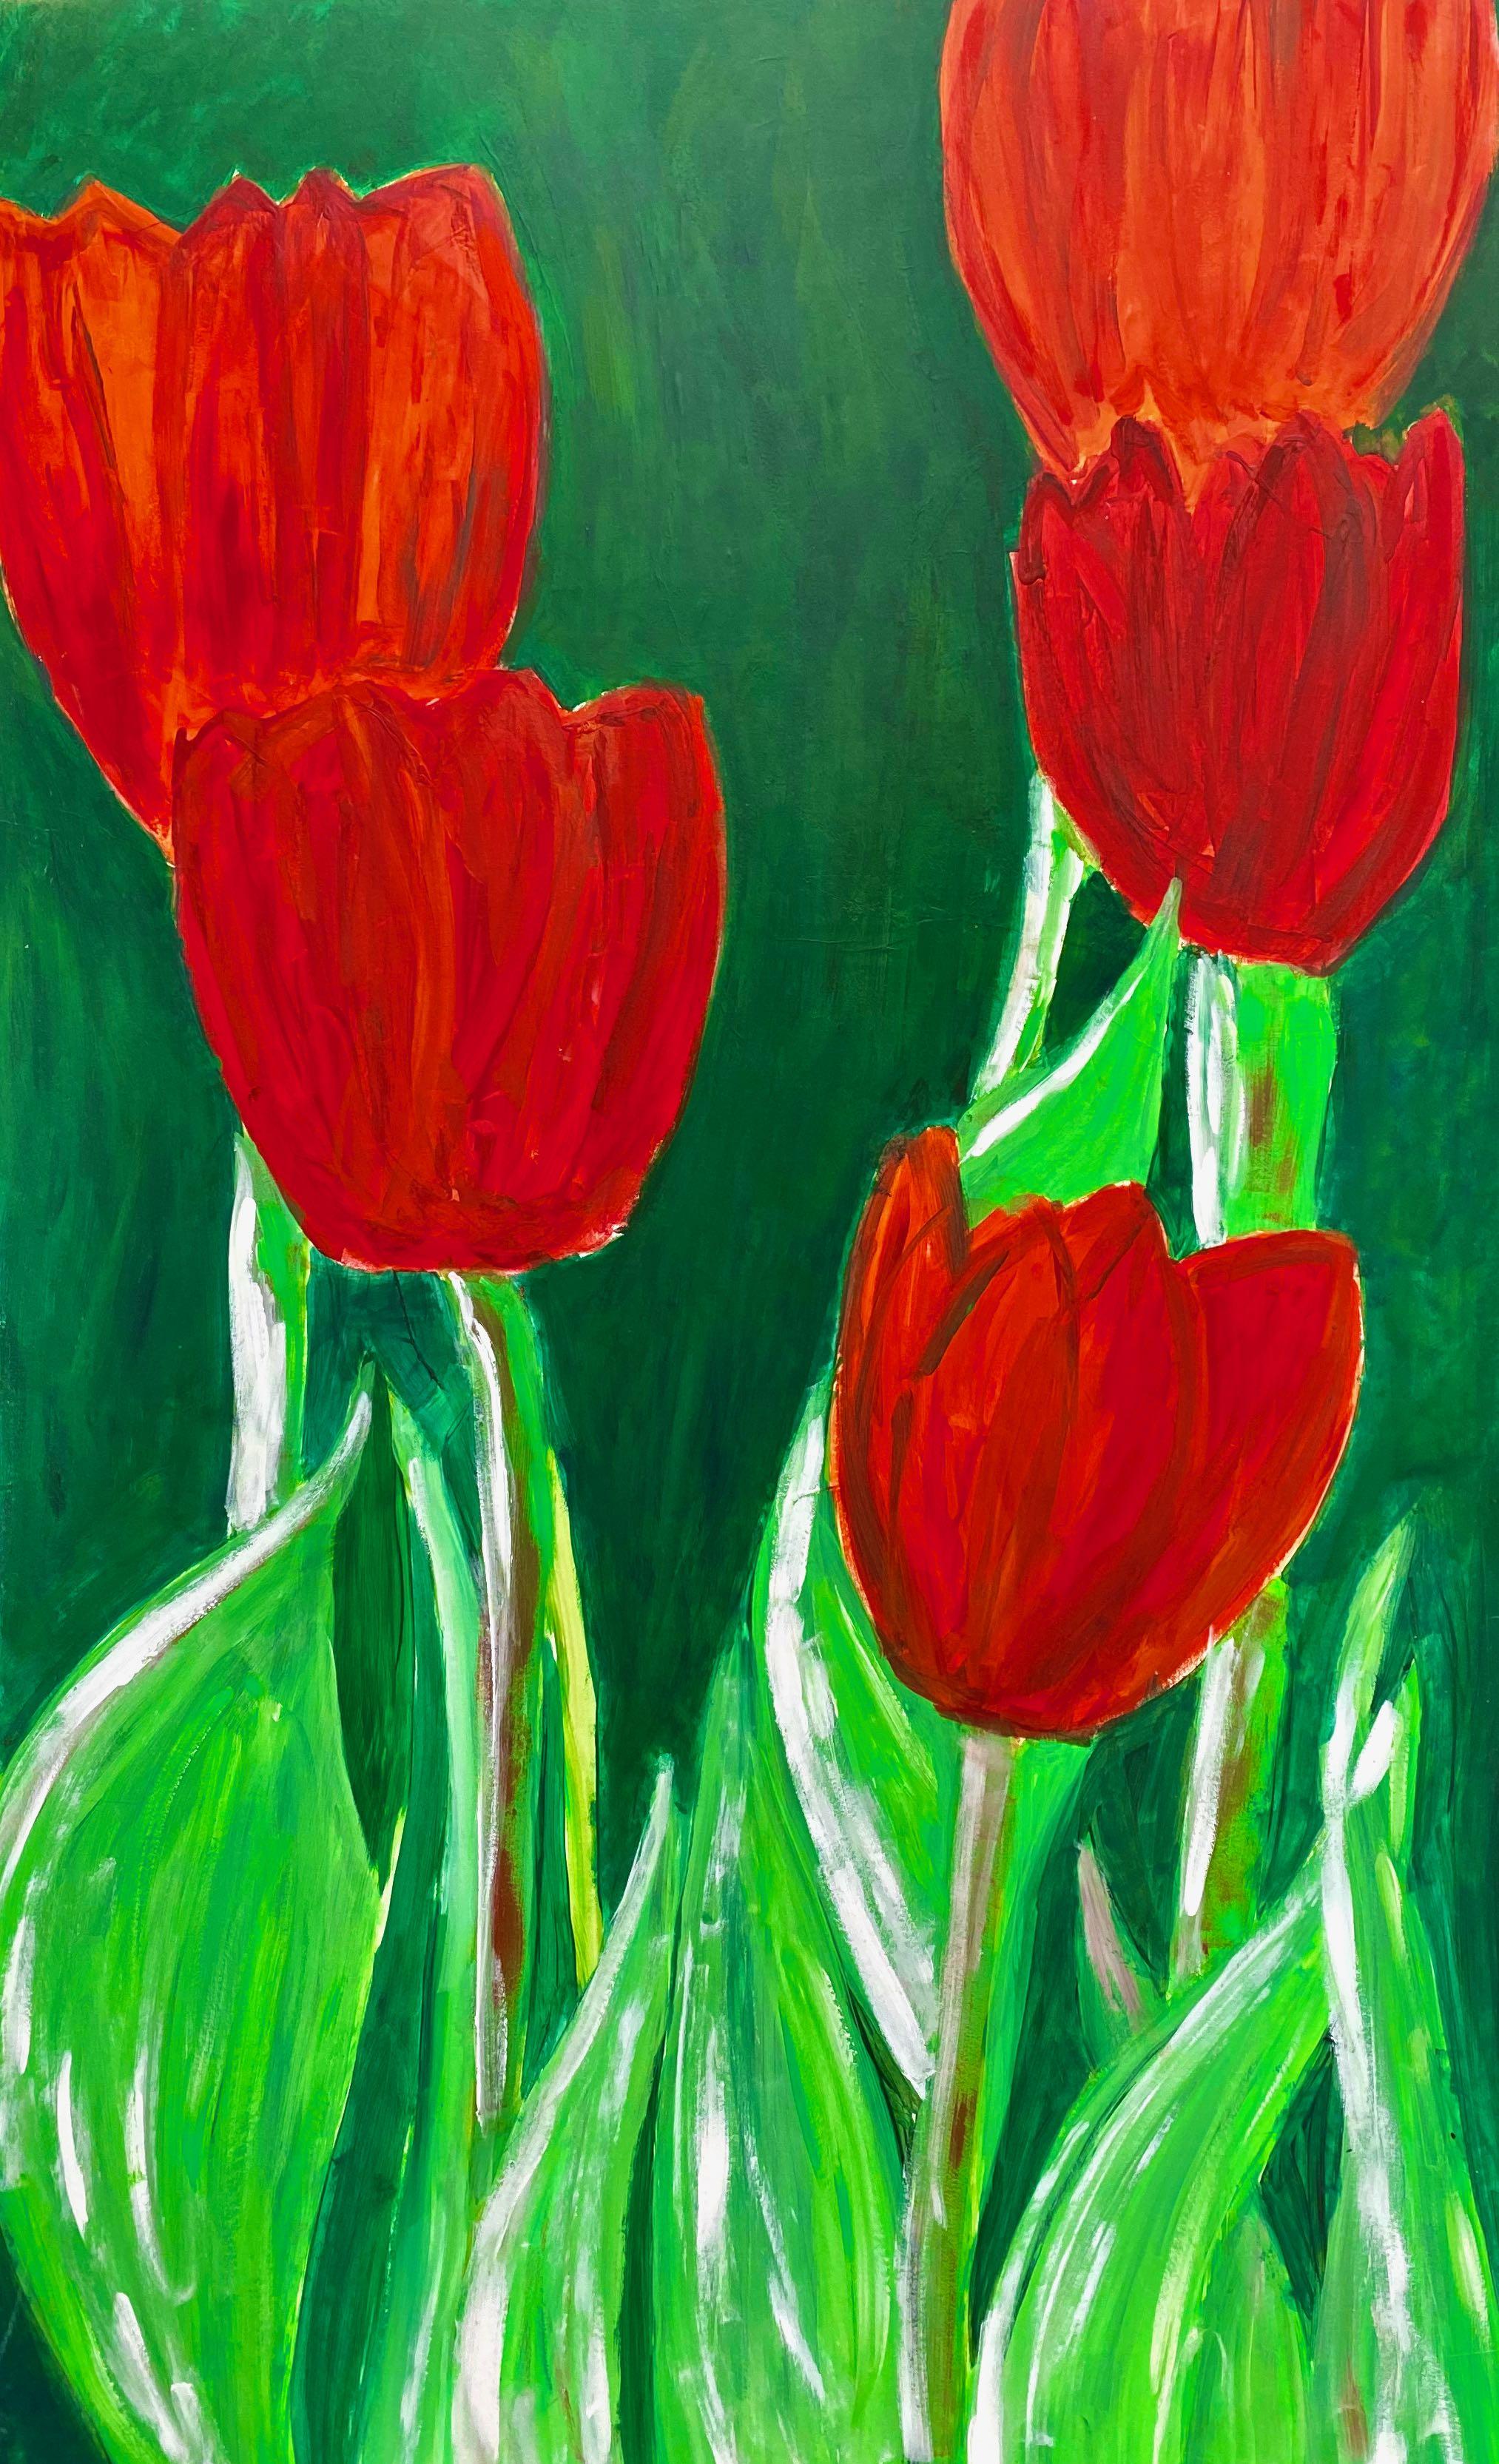 Christine Mafart is an artist of explosive colors, energetic gestures and generous scale. Delving fearlessly into the very heart of nature's vegetation, she joyfully examines the interior or the external appearance of budding and burgeoning flowers